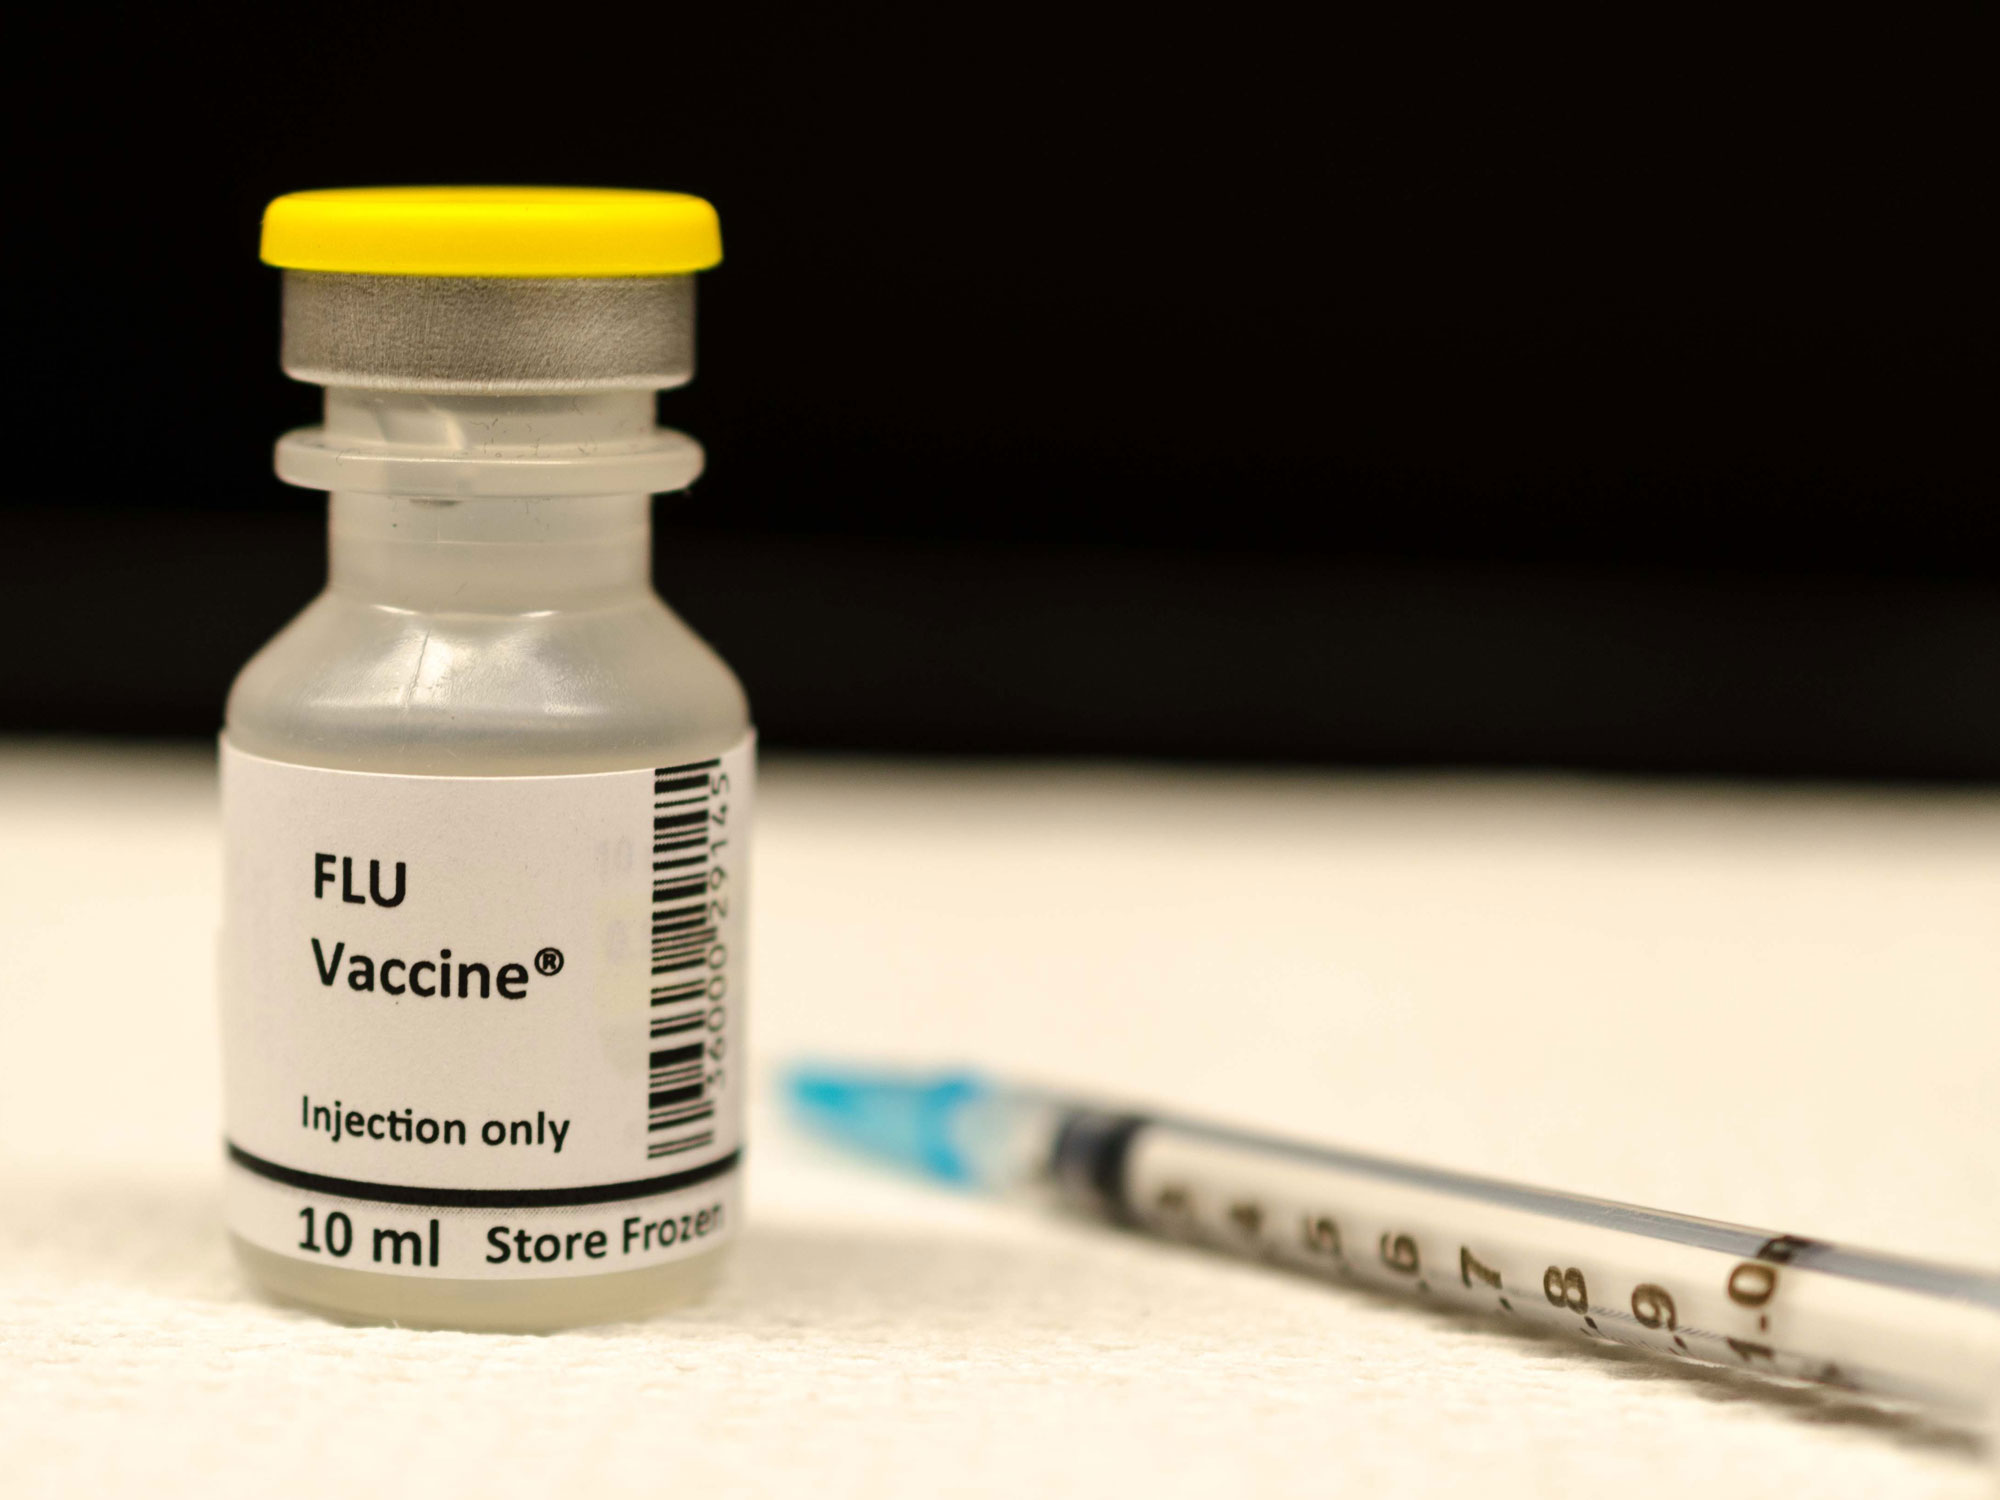 Flu shot: Don’t put your eggs all in one basket